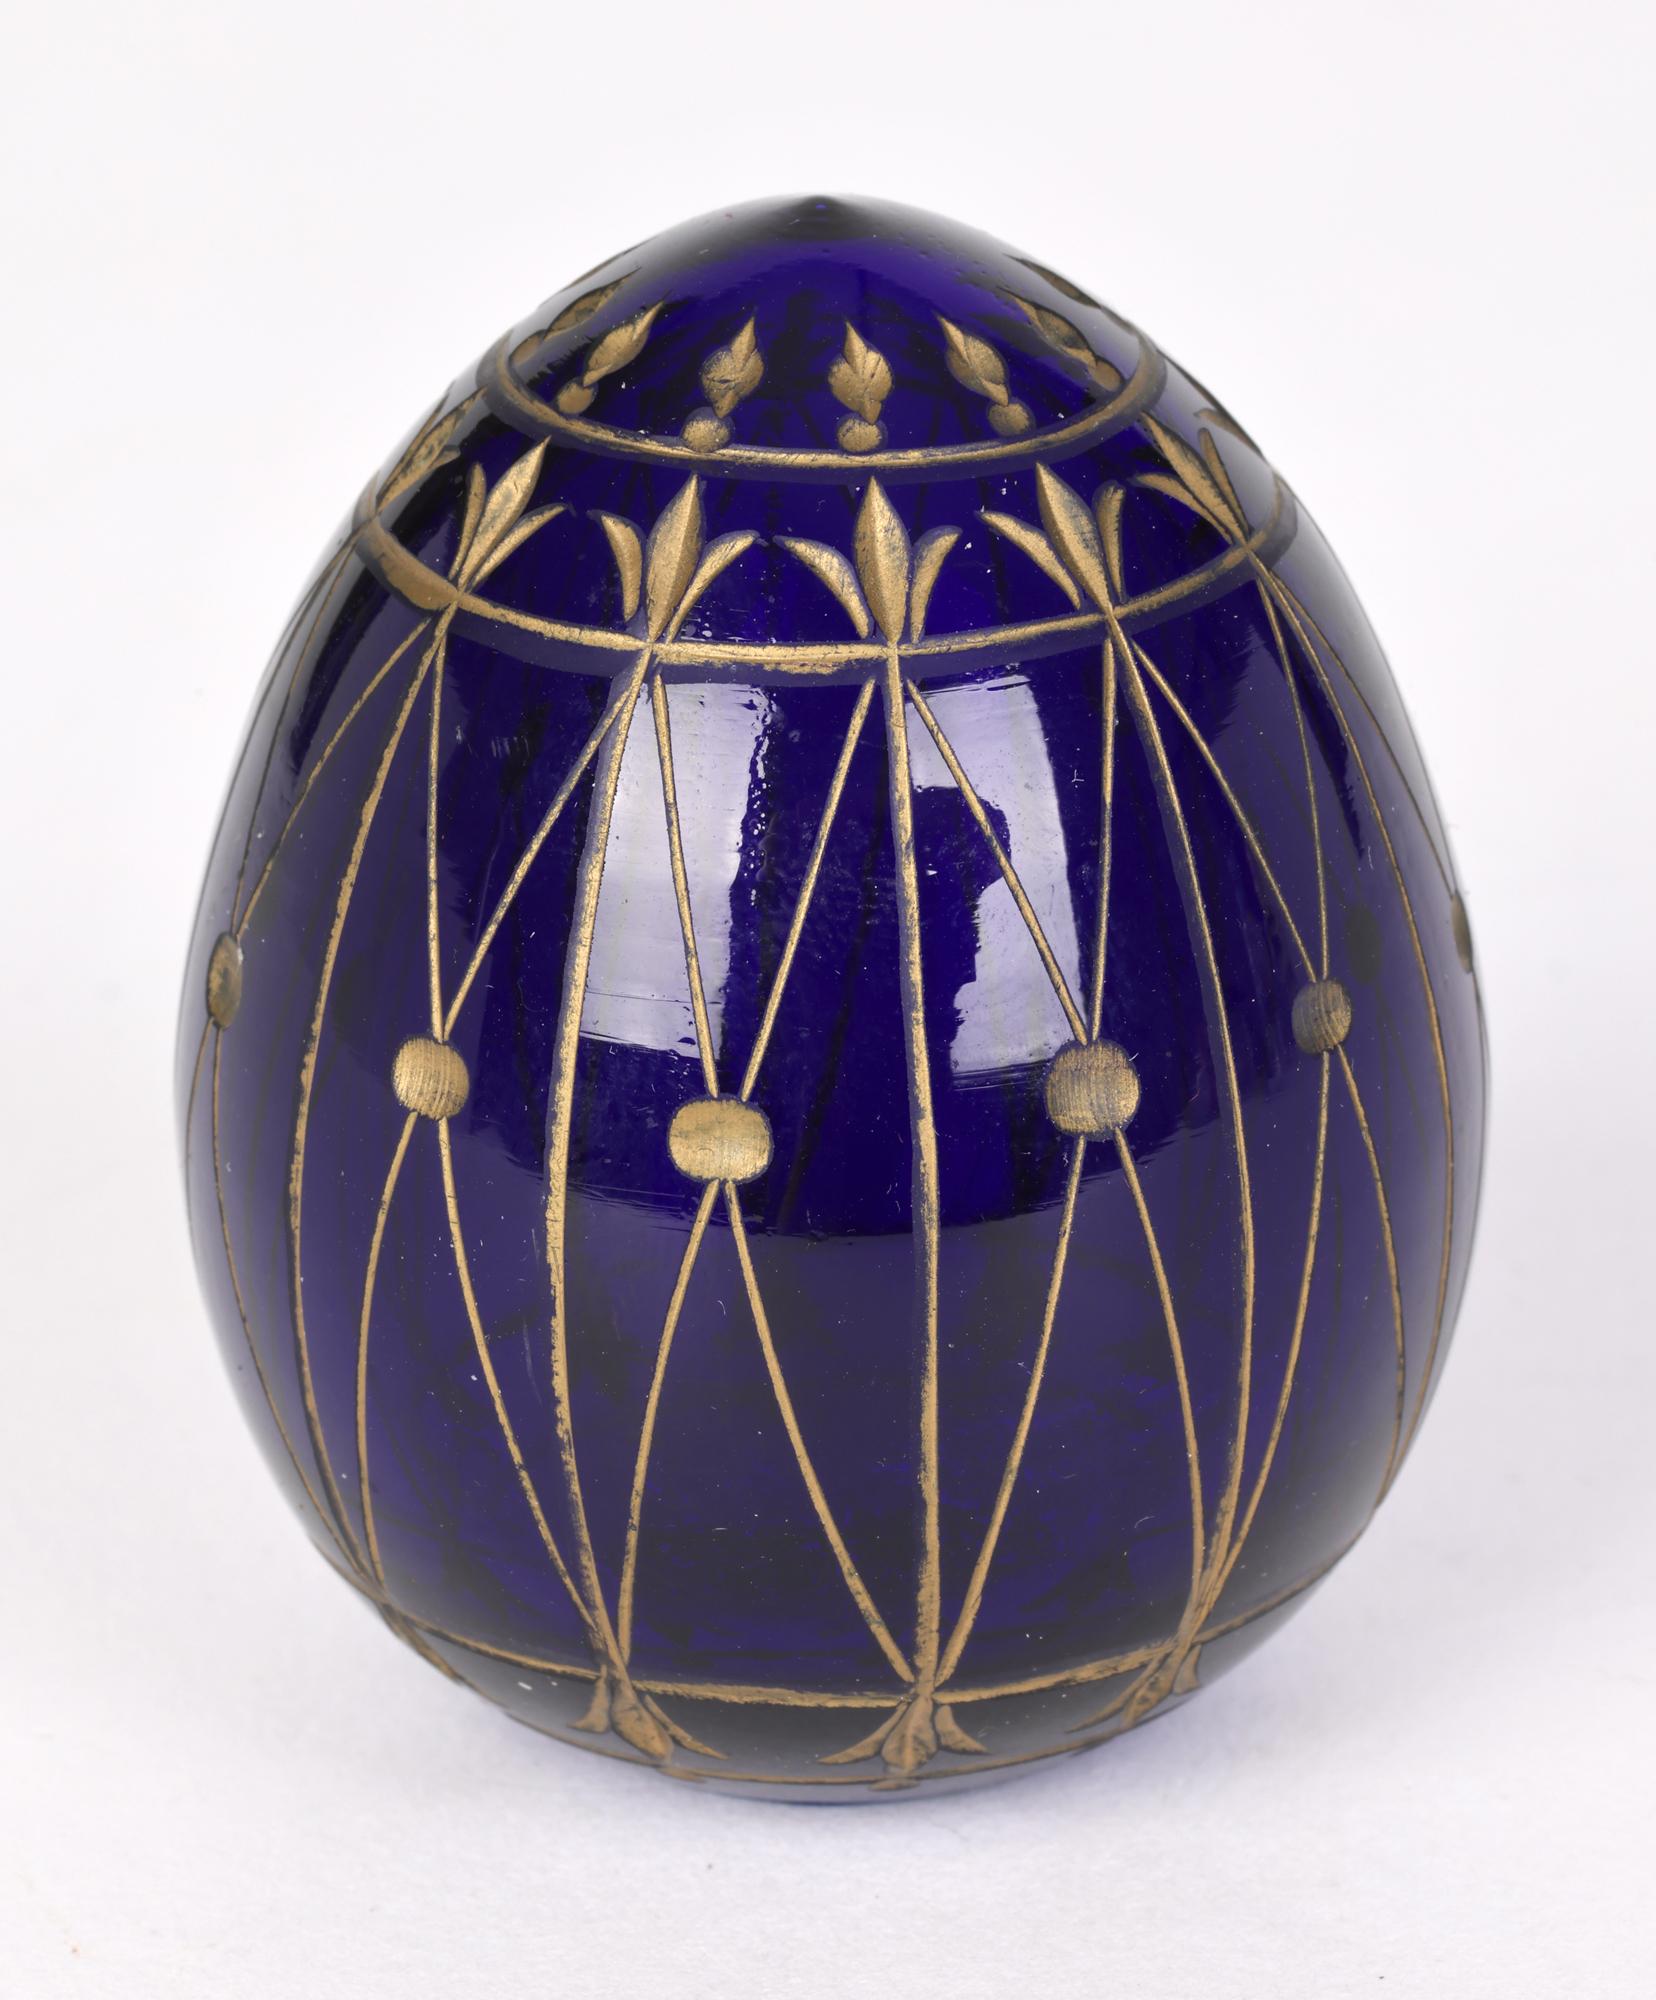 Russian Blue Glass Egg with Engraved Designs Faberge Label 2